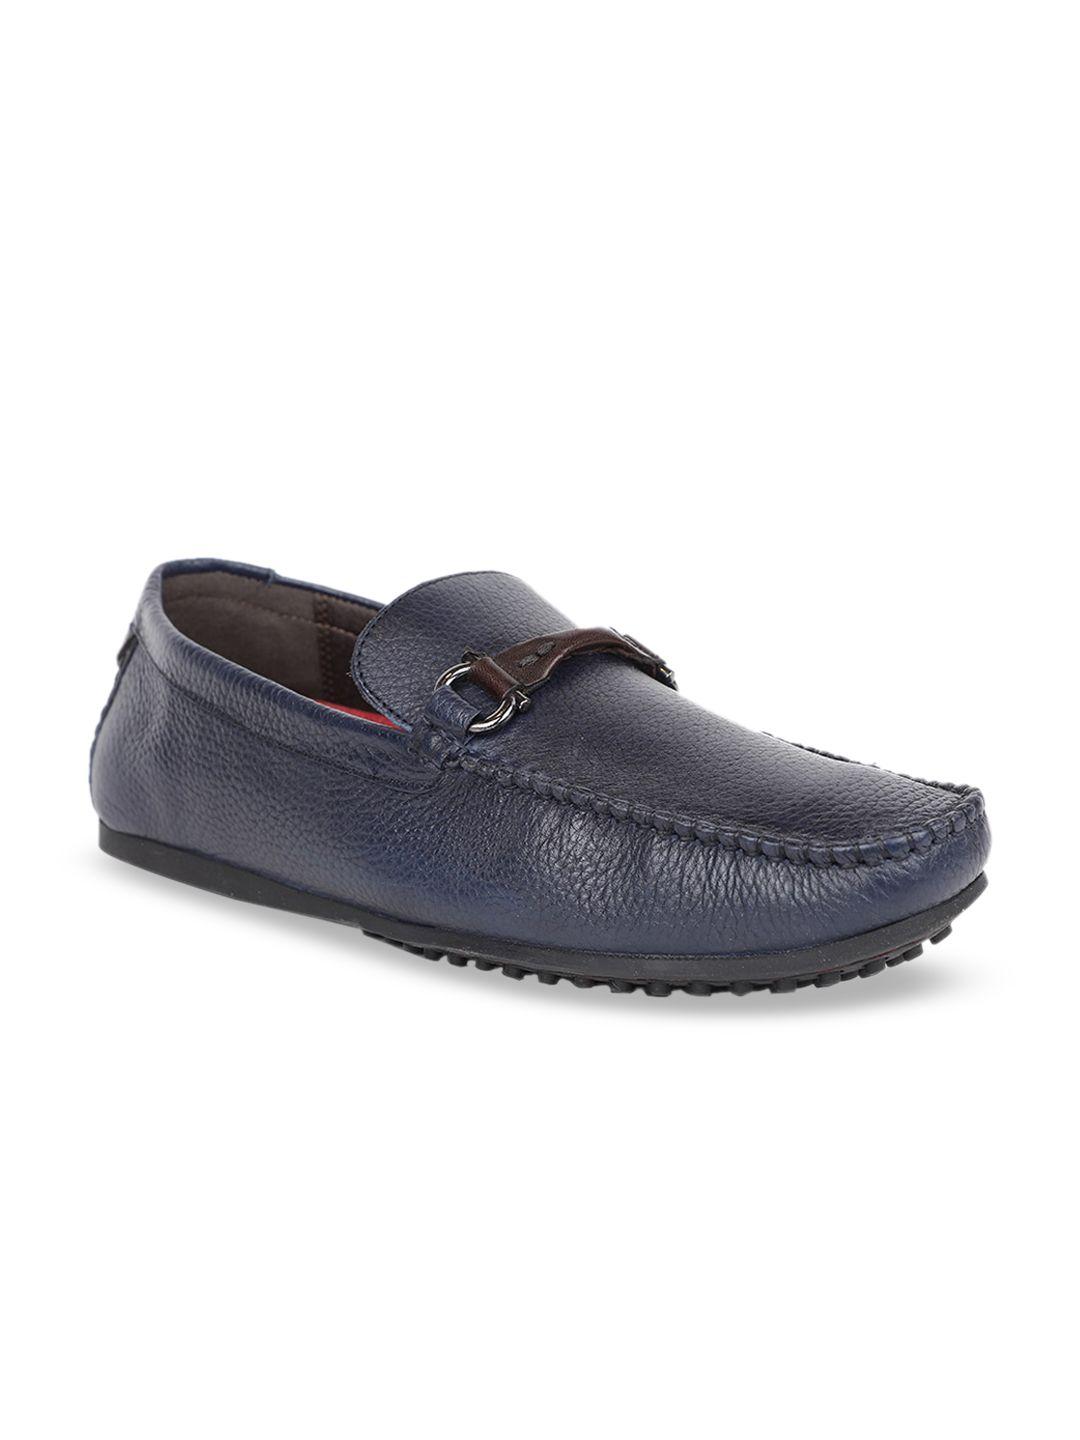 hush puppies men navy blue leather loafers